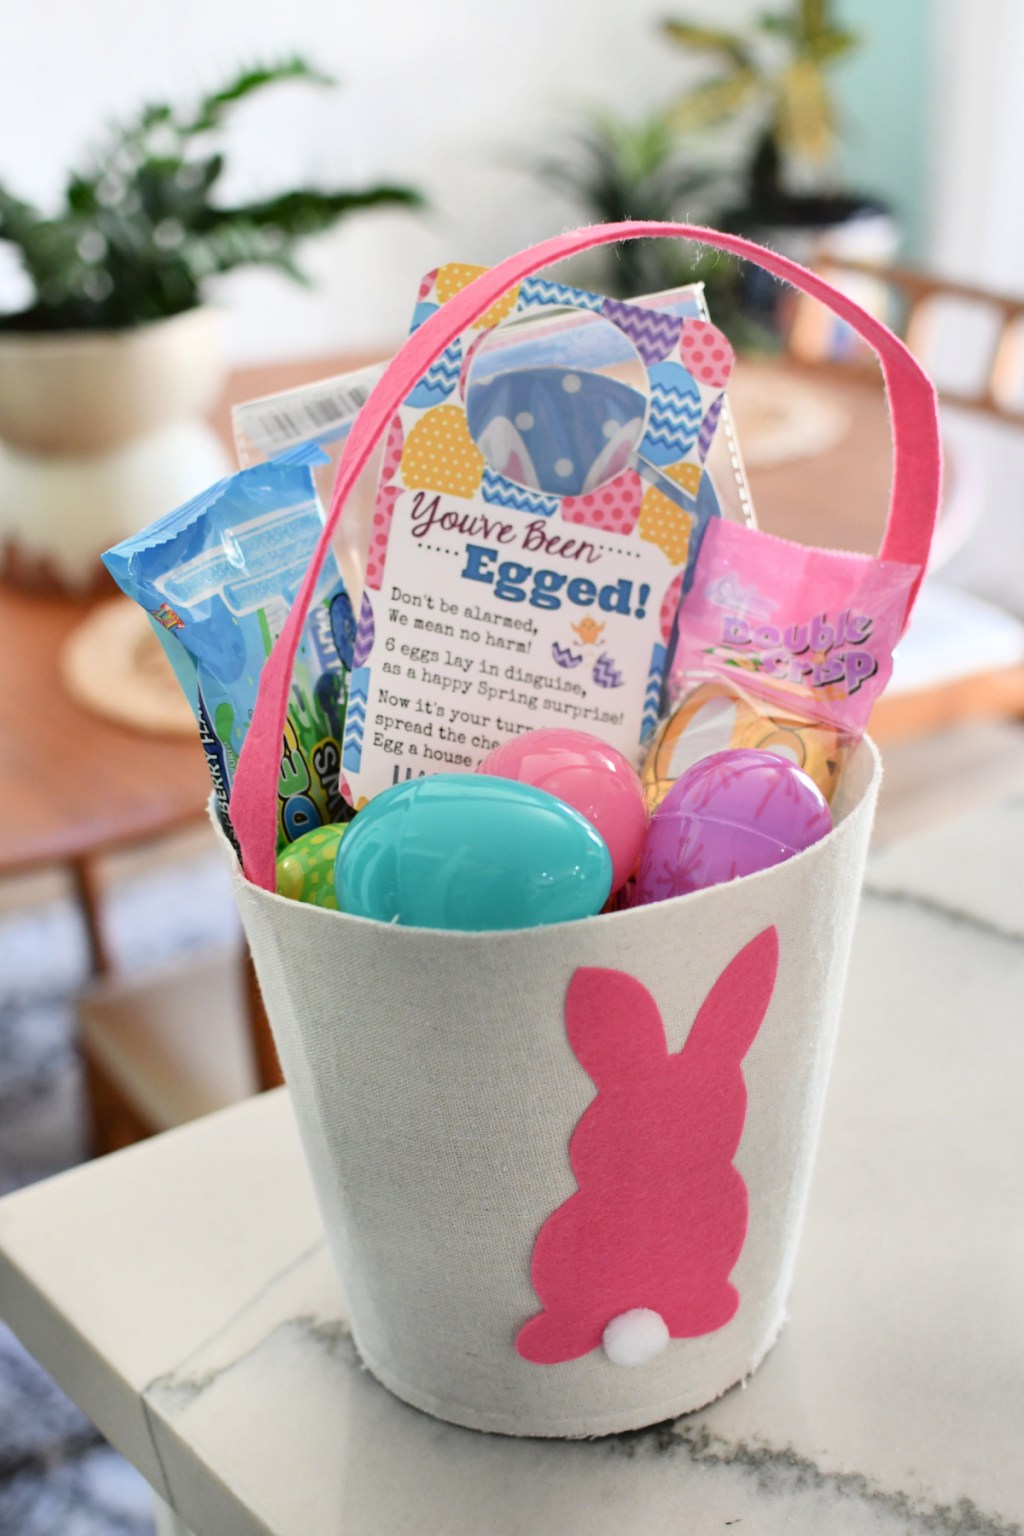 you've Been Egged Easter Basket with Eggs and Candy